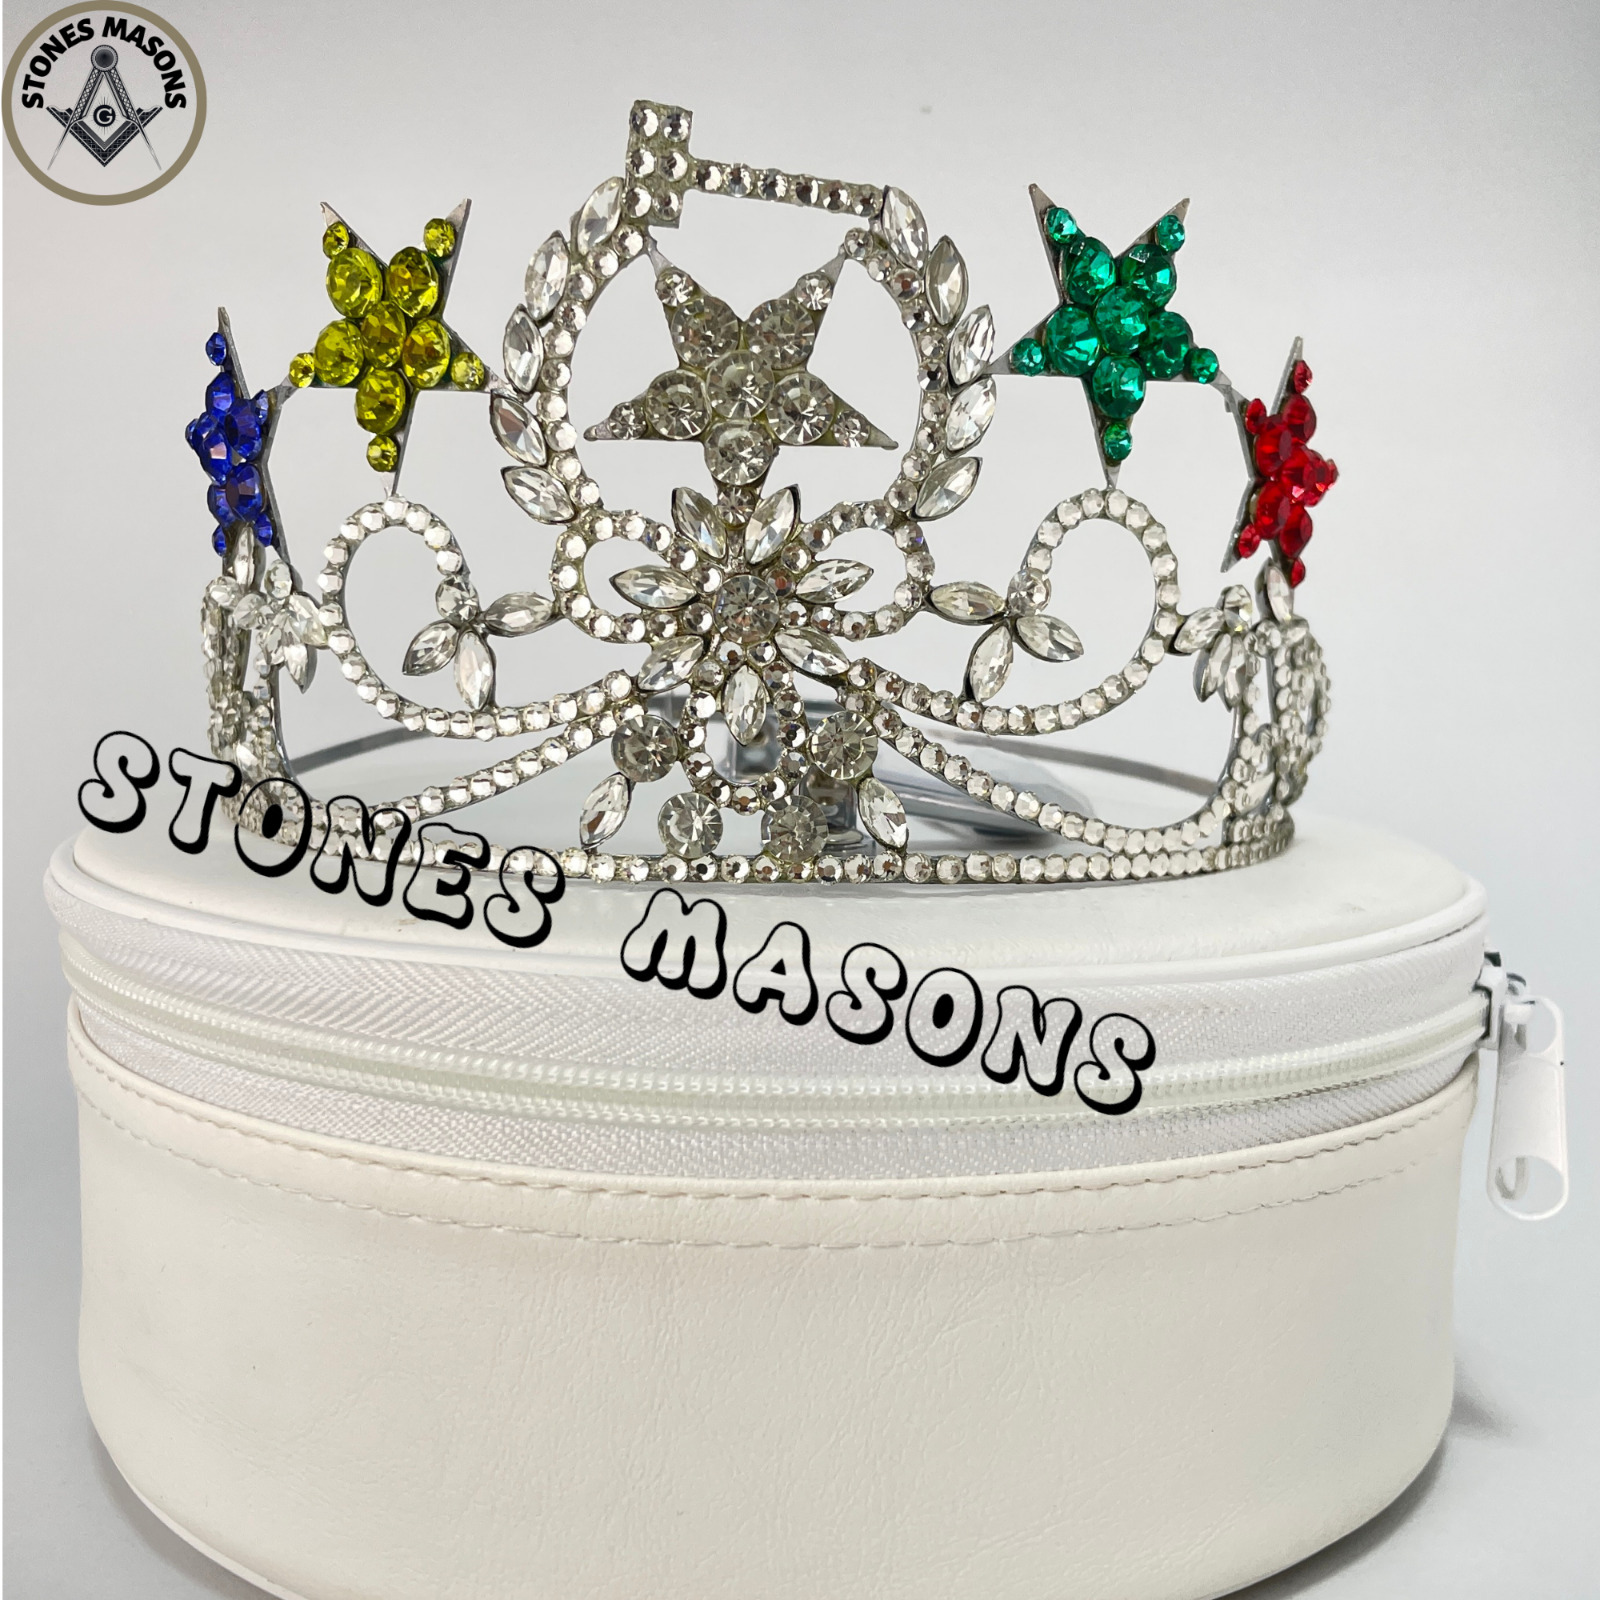 OES Five Star Grand Worthy Matron Crown Silver tone Adjustable Fitting with Case